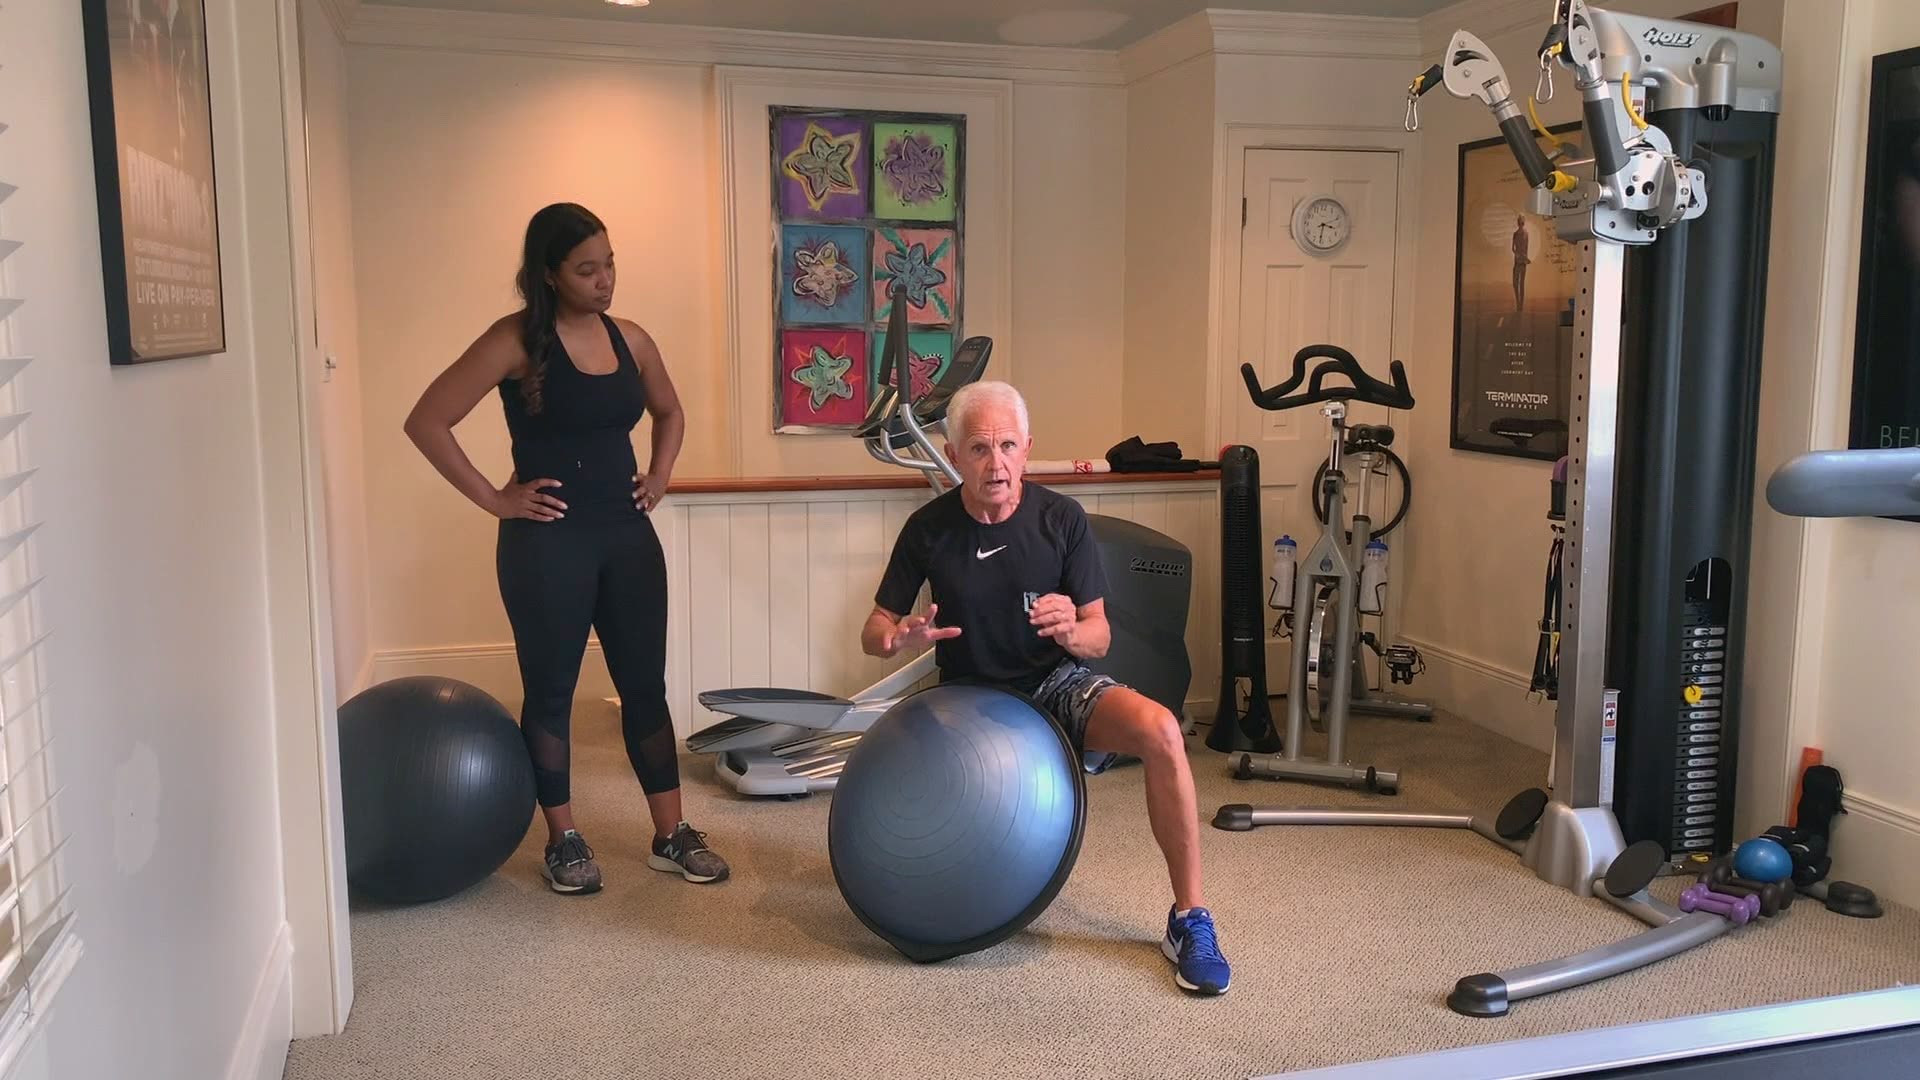 Fitness expert Mackie Shilstone shows April Dupre some tips for exercising in small spaces at home, using what is called a Bosu stability ball.